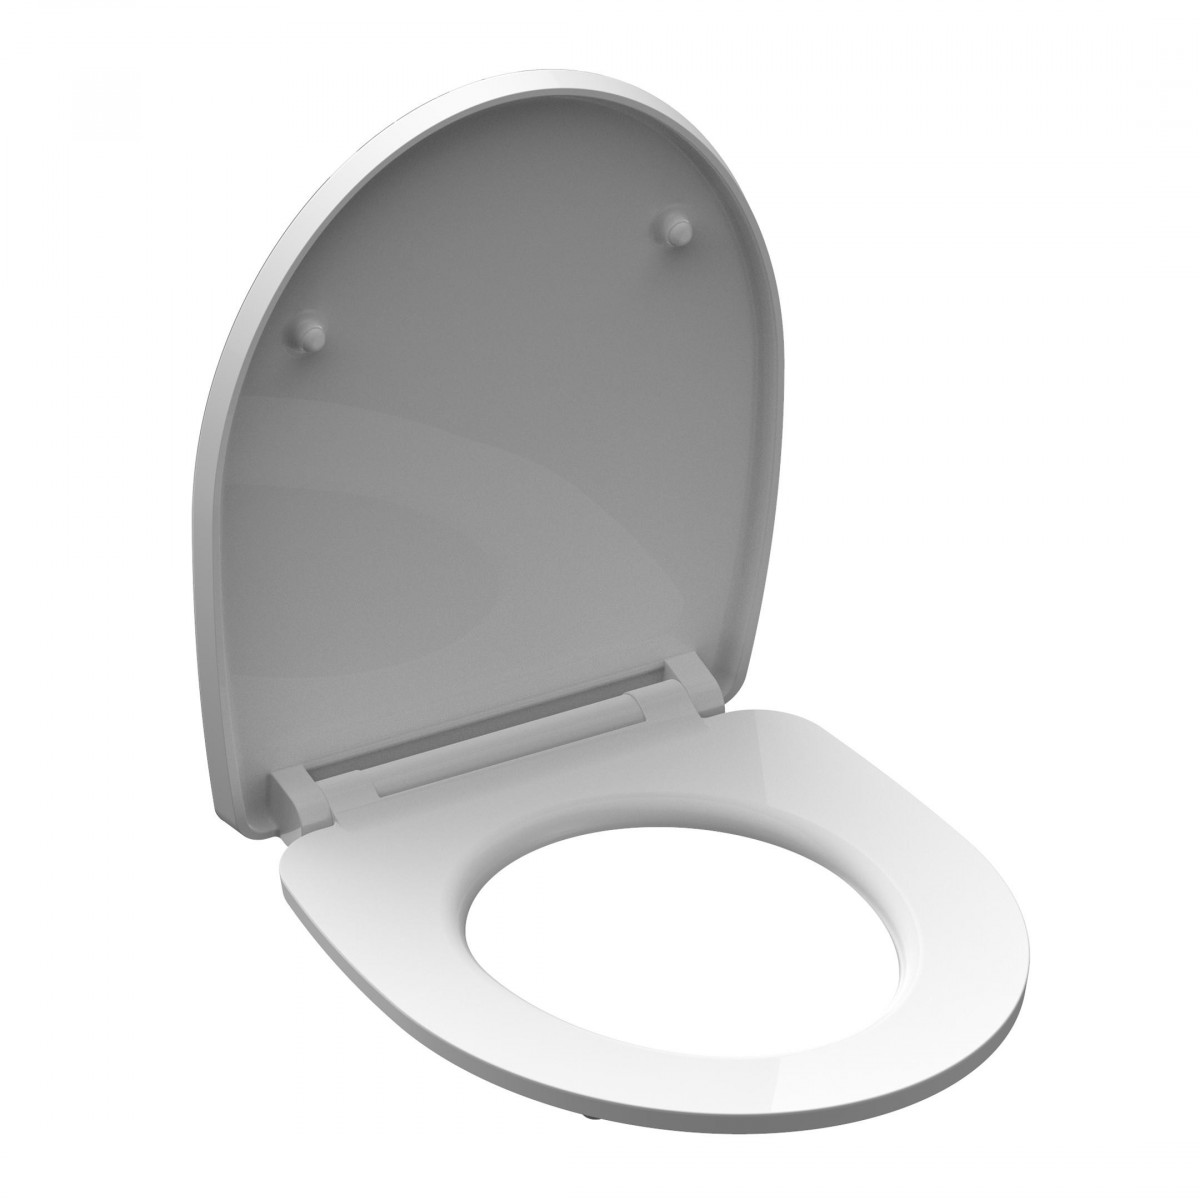 Duroplast HG Toilet Seat WATER LILY with Soft Close and Quick Release